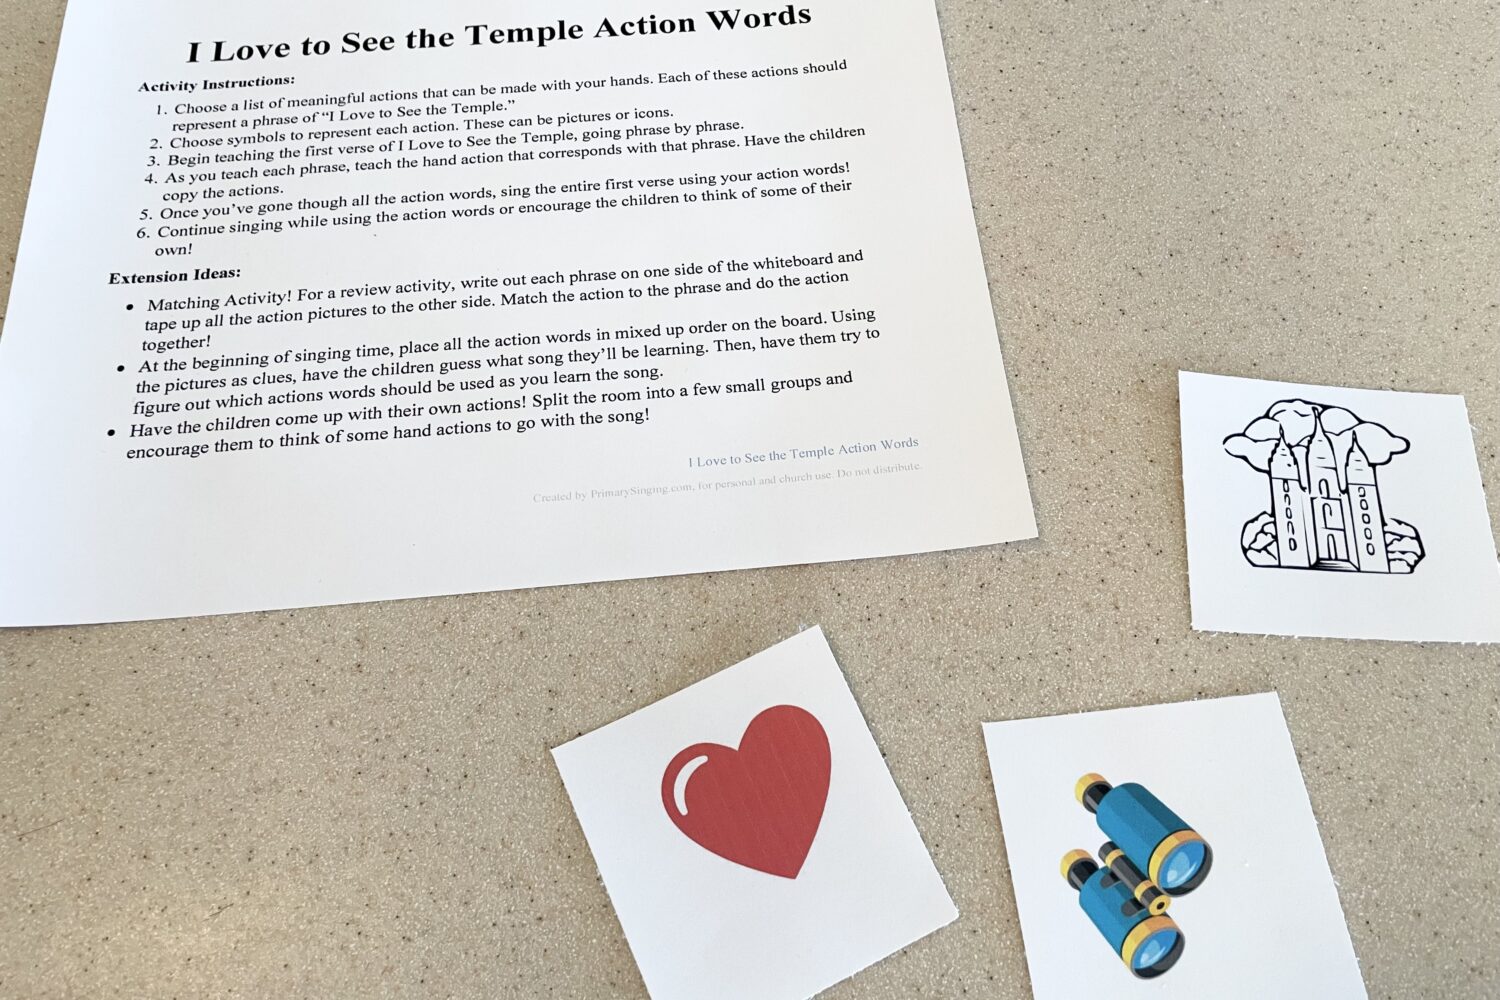 I Love to See the Temple Action Words Easy ideas for Music Leaders IMG 6674 e1655858494441